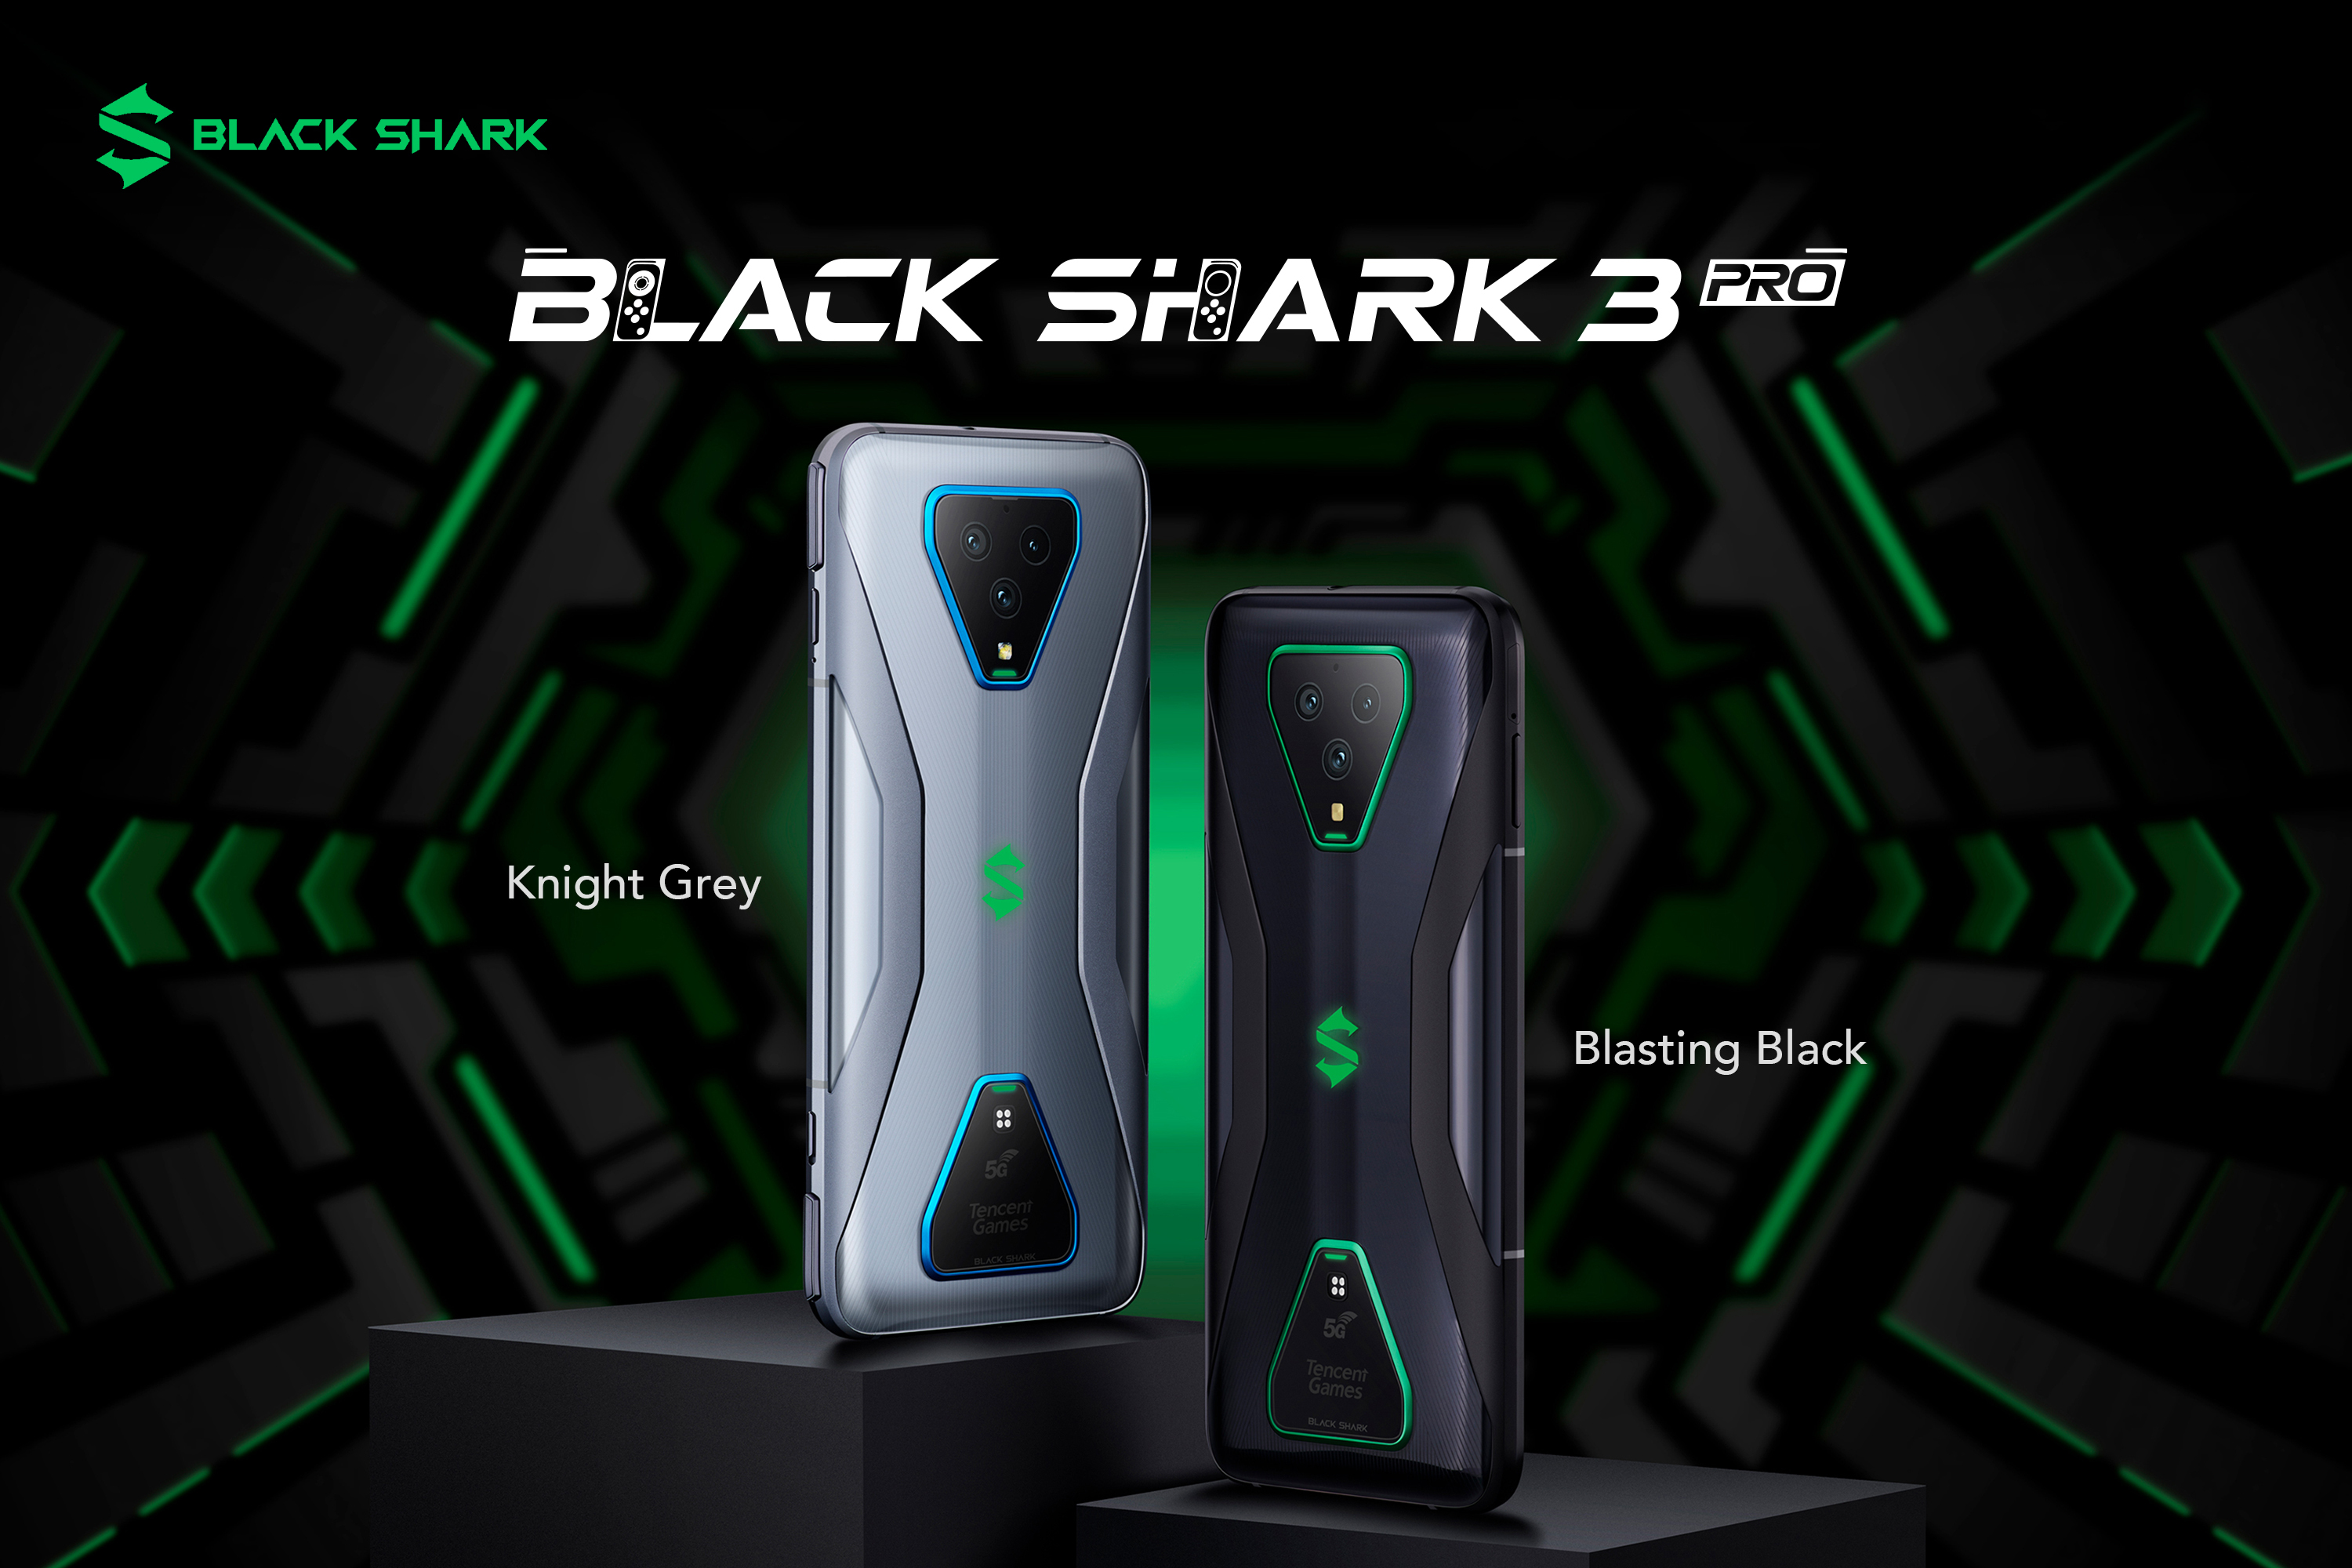 Black Shark Unveiled the World First 5G Gaming Smartphone Black Shark 3,  Black Shark 3 Pro, and Black Shark Bluetooth Earphones 2